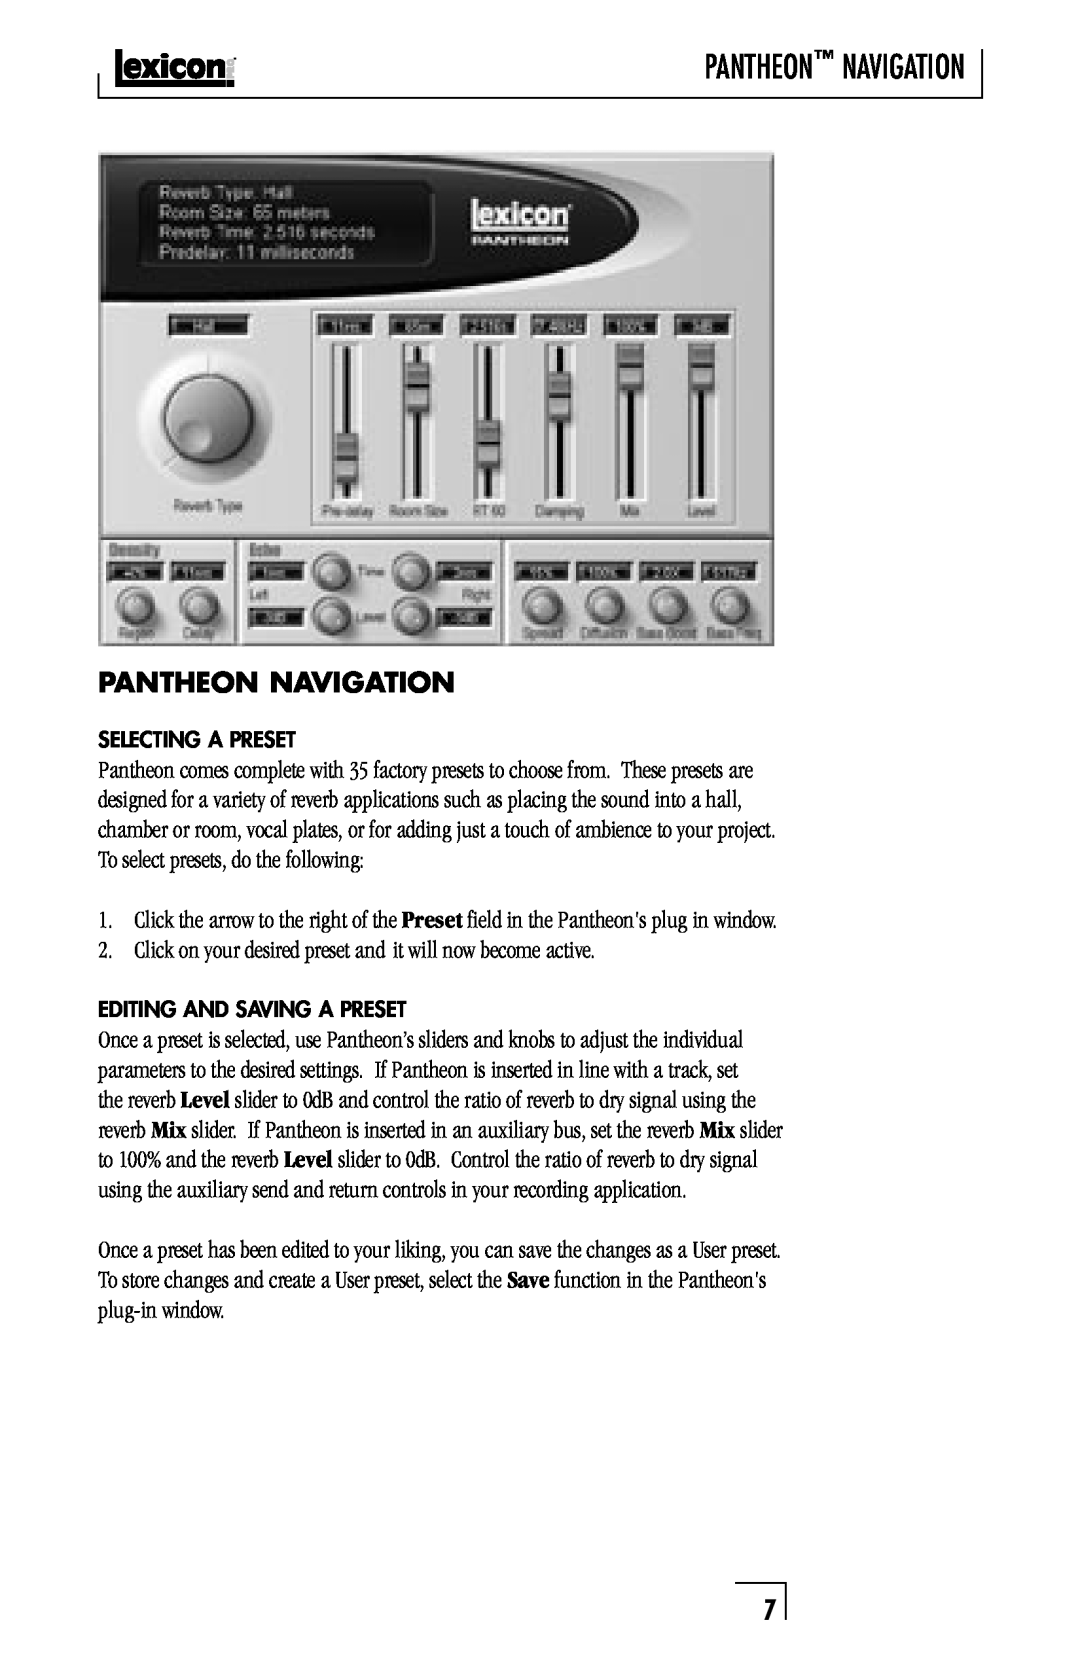 Lexicon musical instrument owner manual Pantheon Navigation 